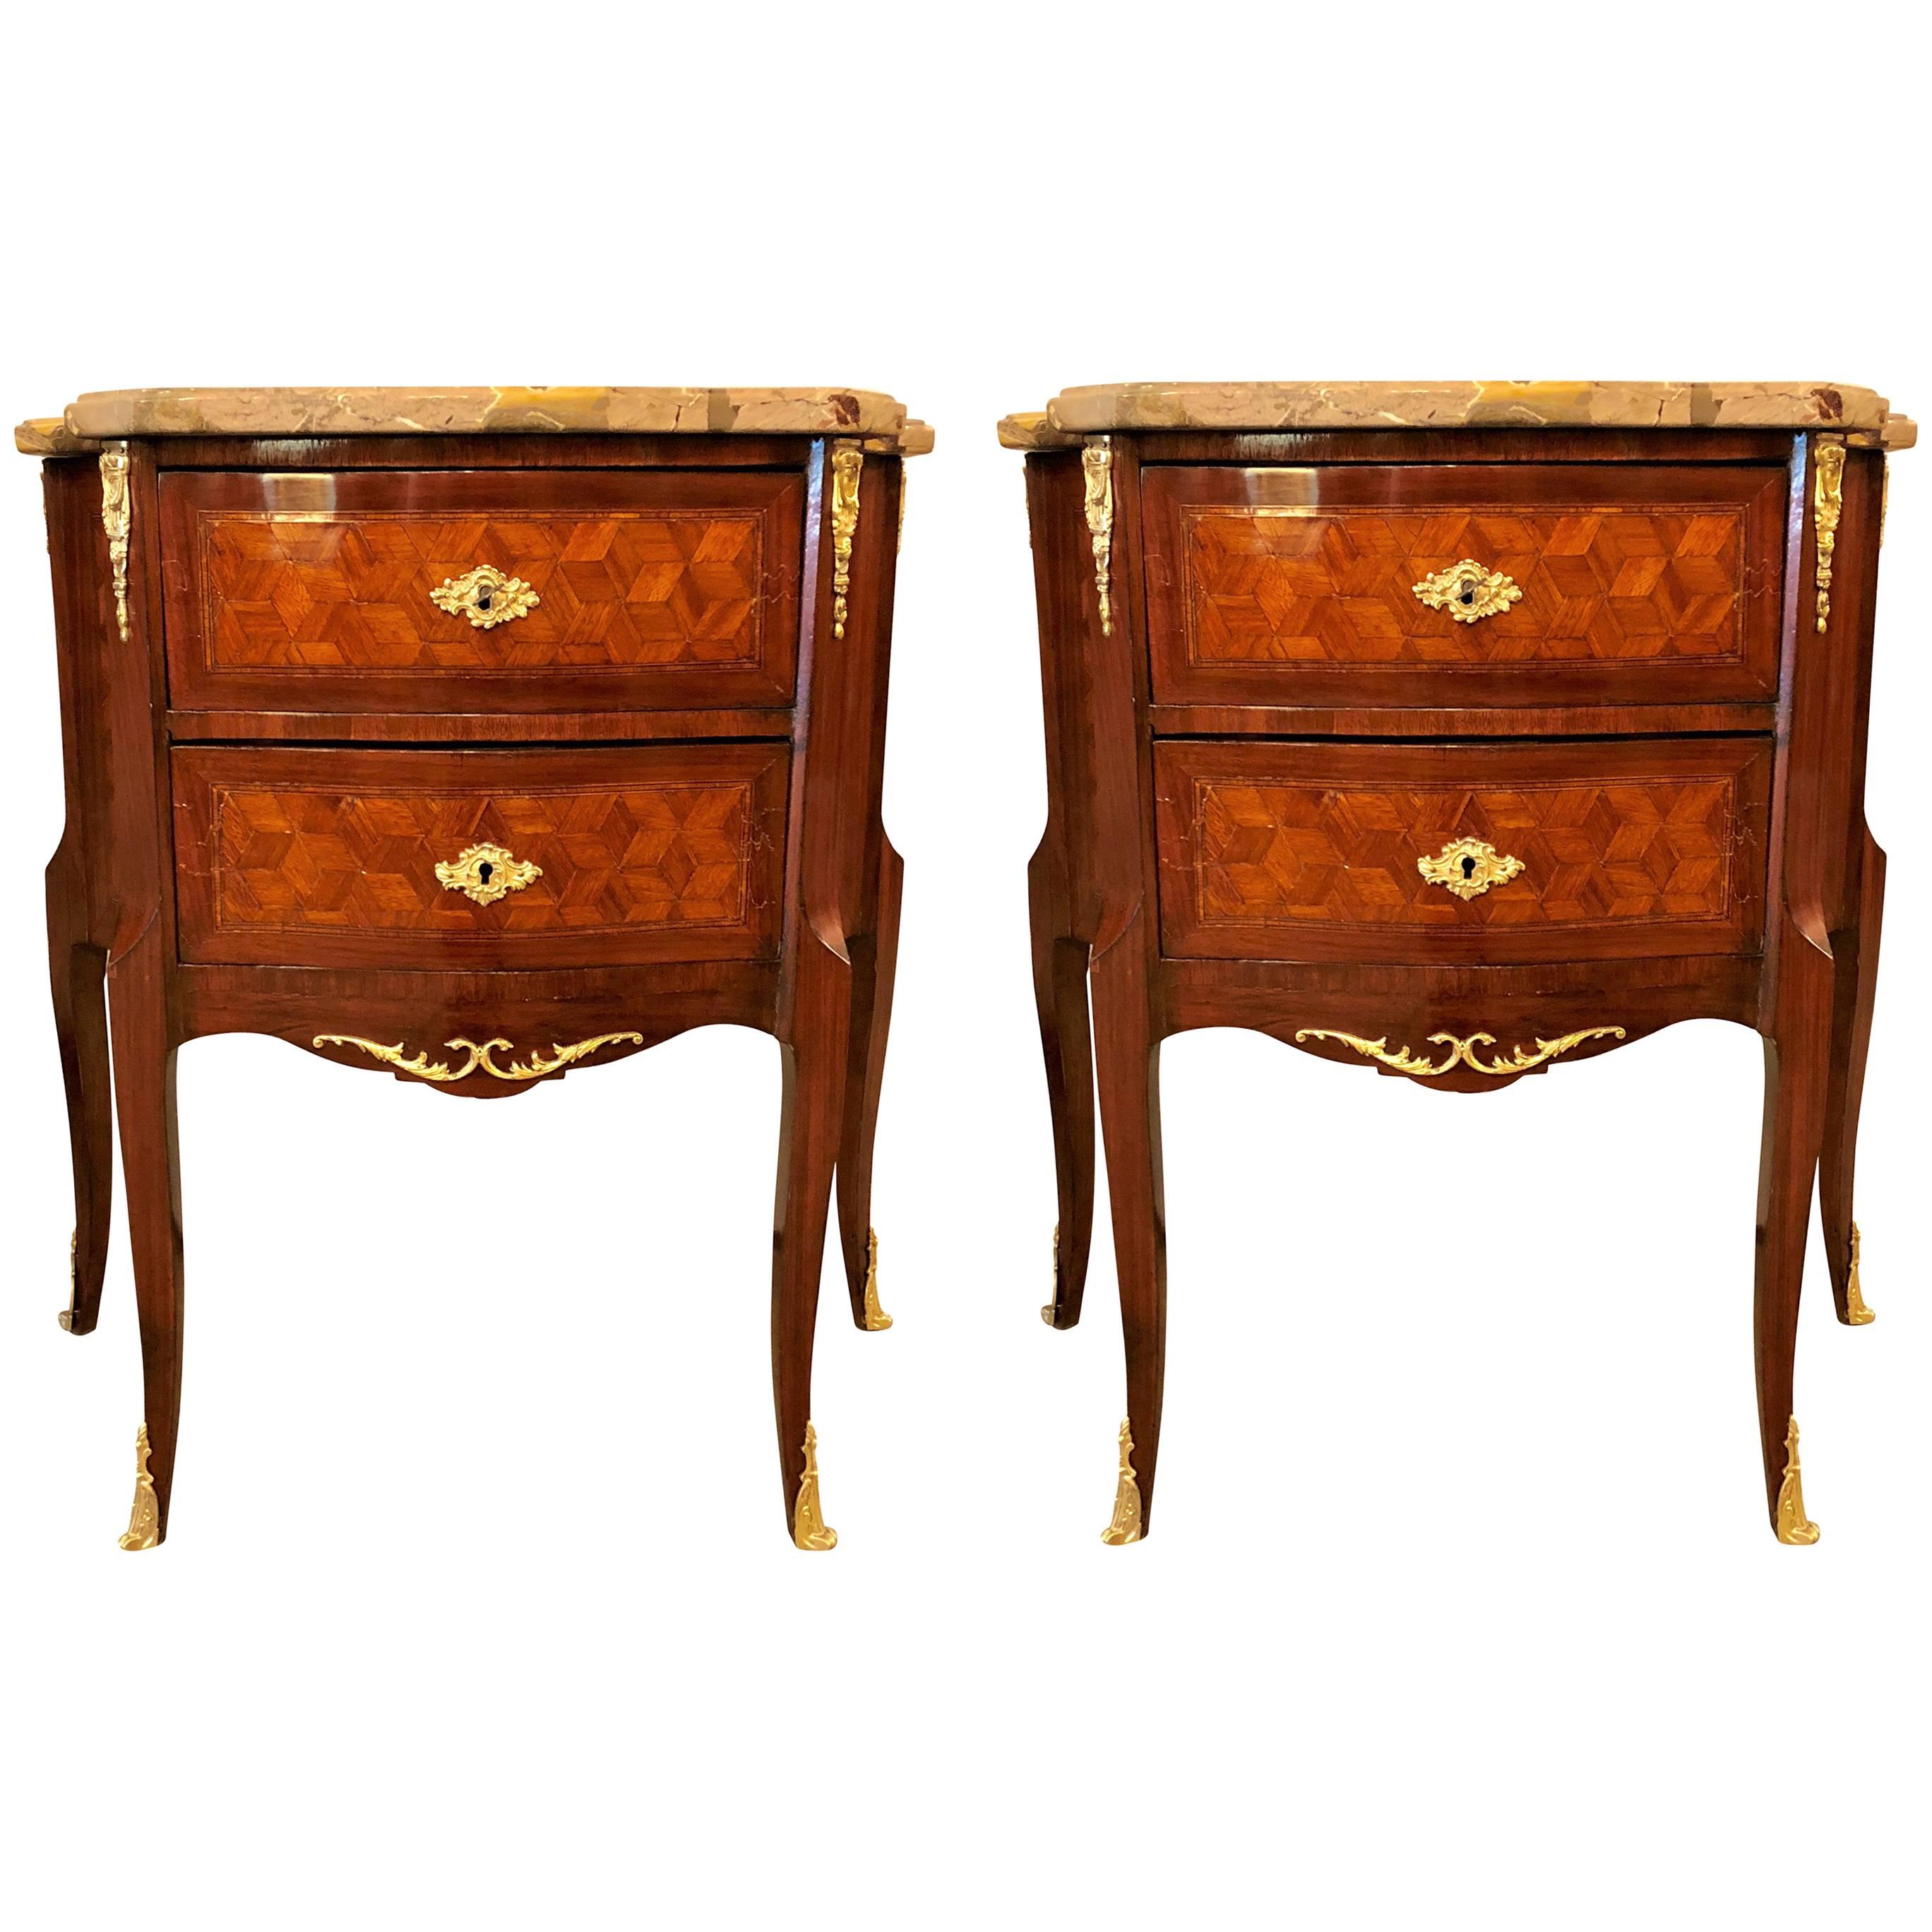 Pair of French Marble Top Two Drawers Bronze-Mounted Tables or Nightstands